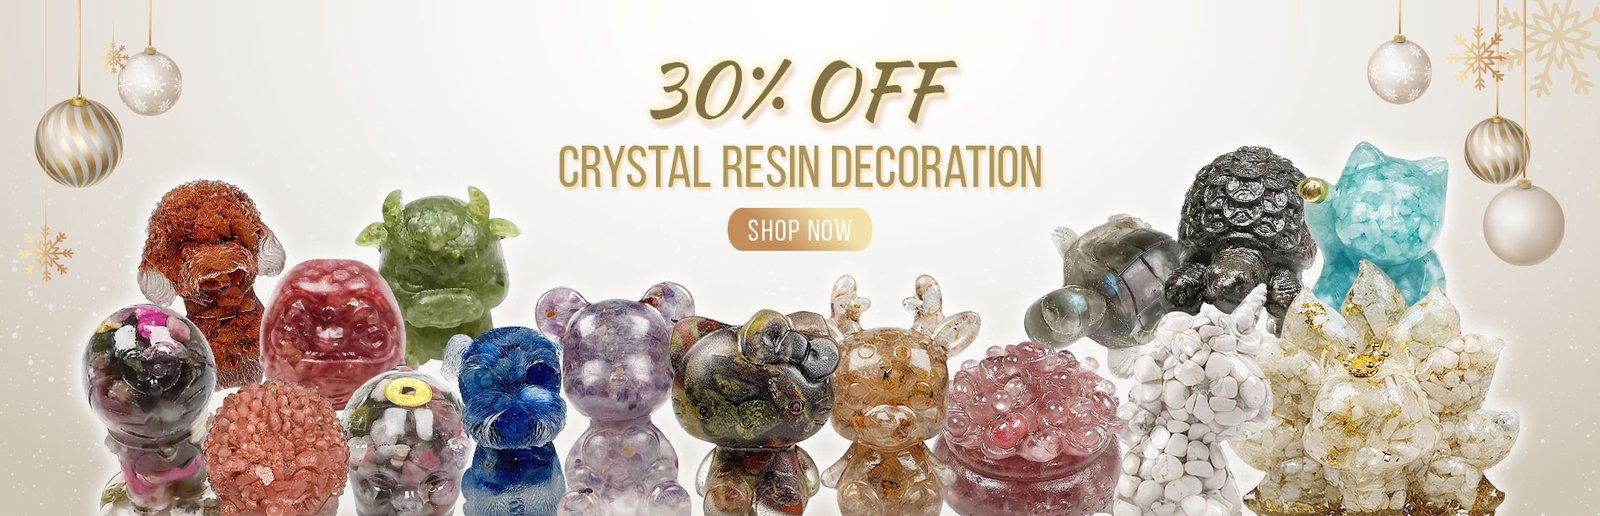 Crystal-Resin-Decoration-30%-OFF-main